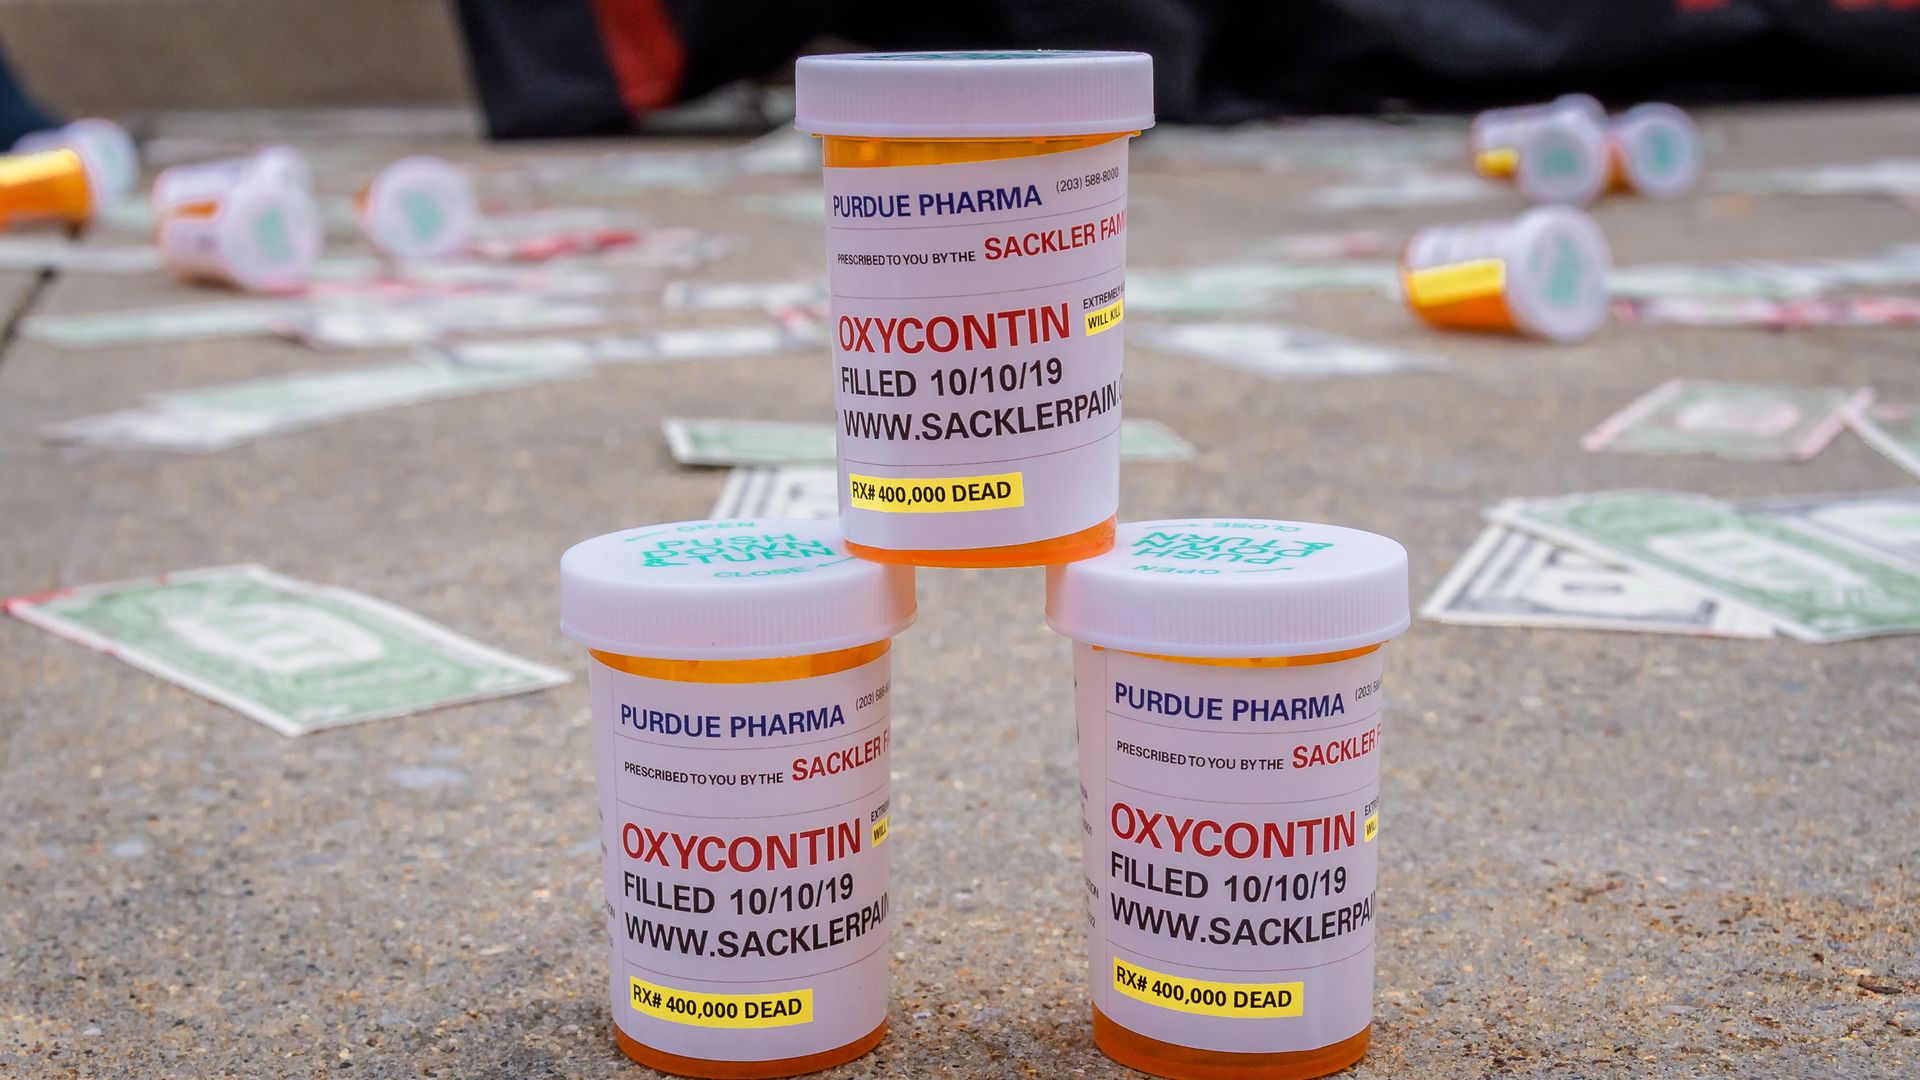 Bottles of OxyContin